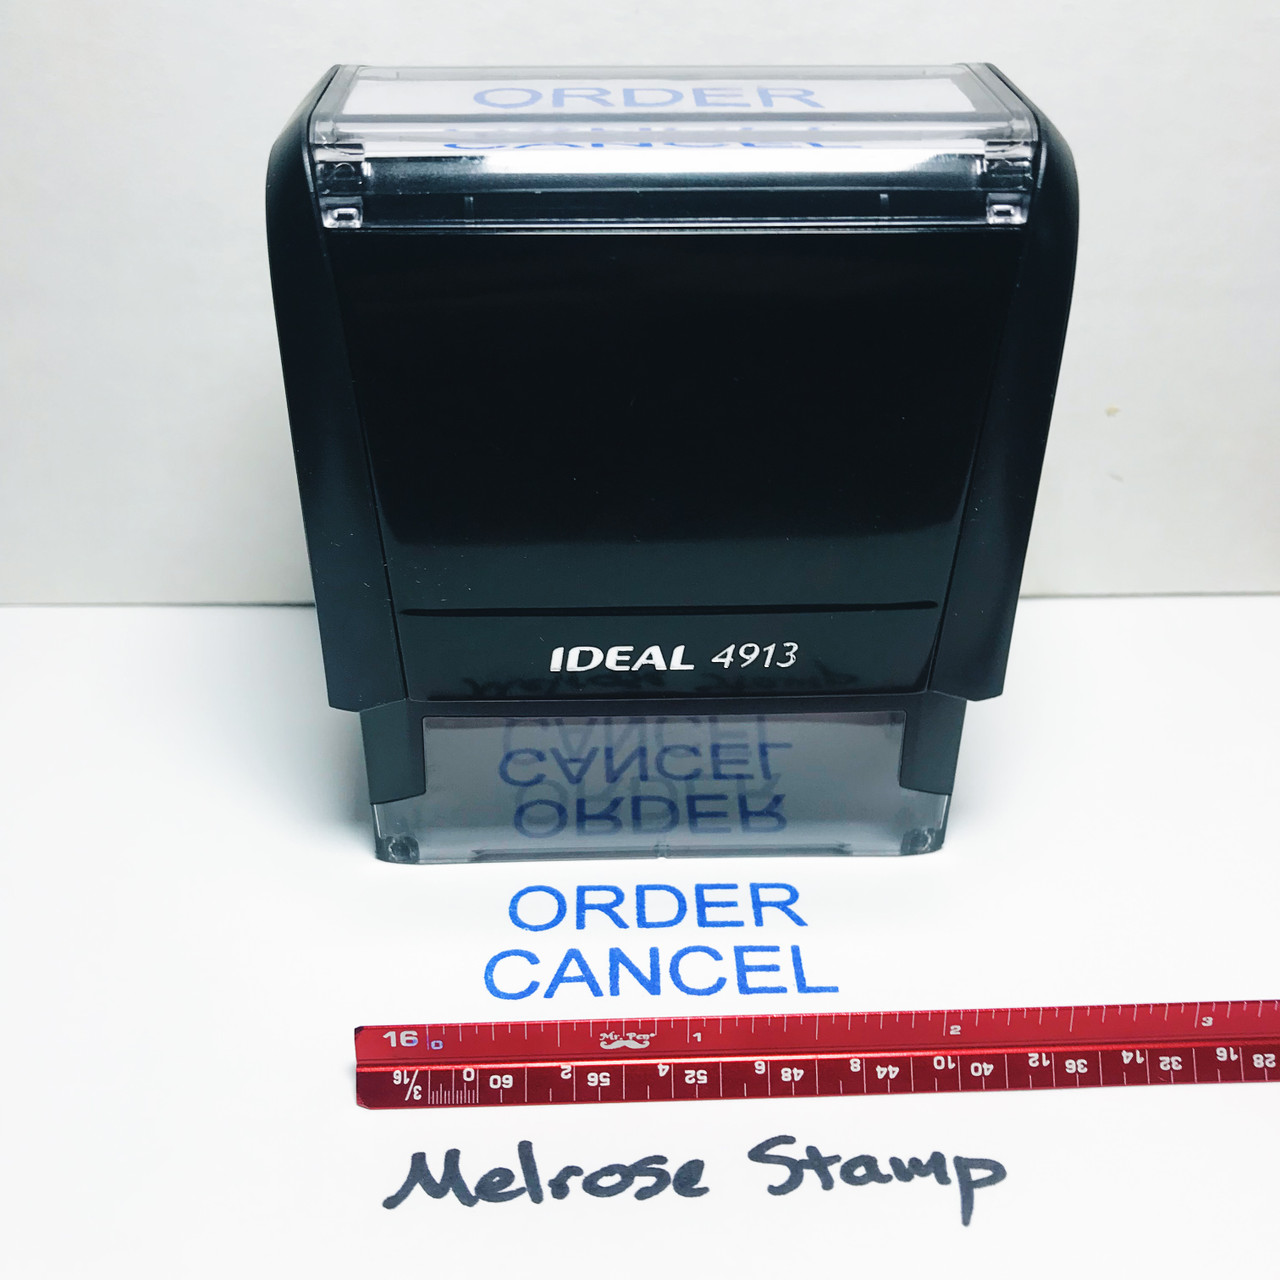 ORDER CANCEL Rubber Stamp for office use self-inking